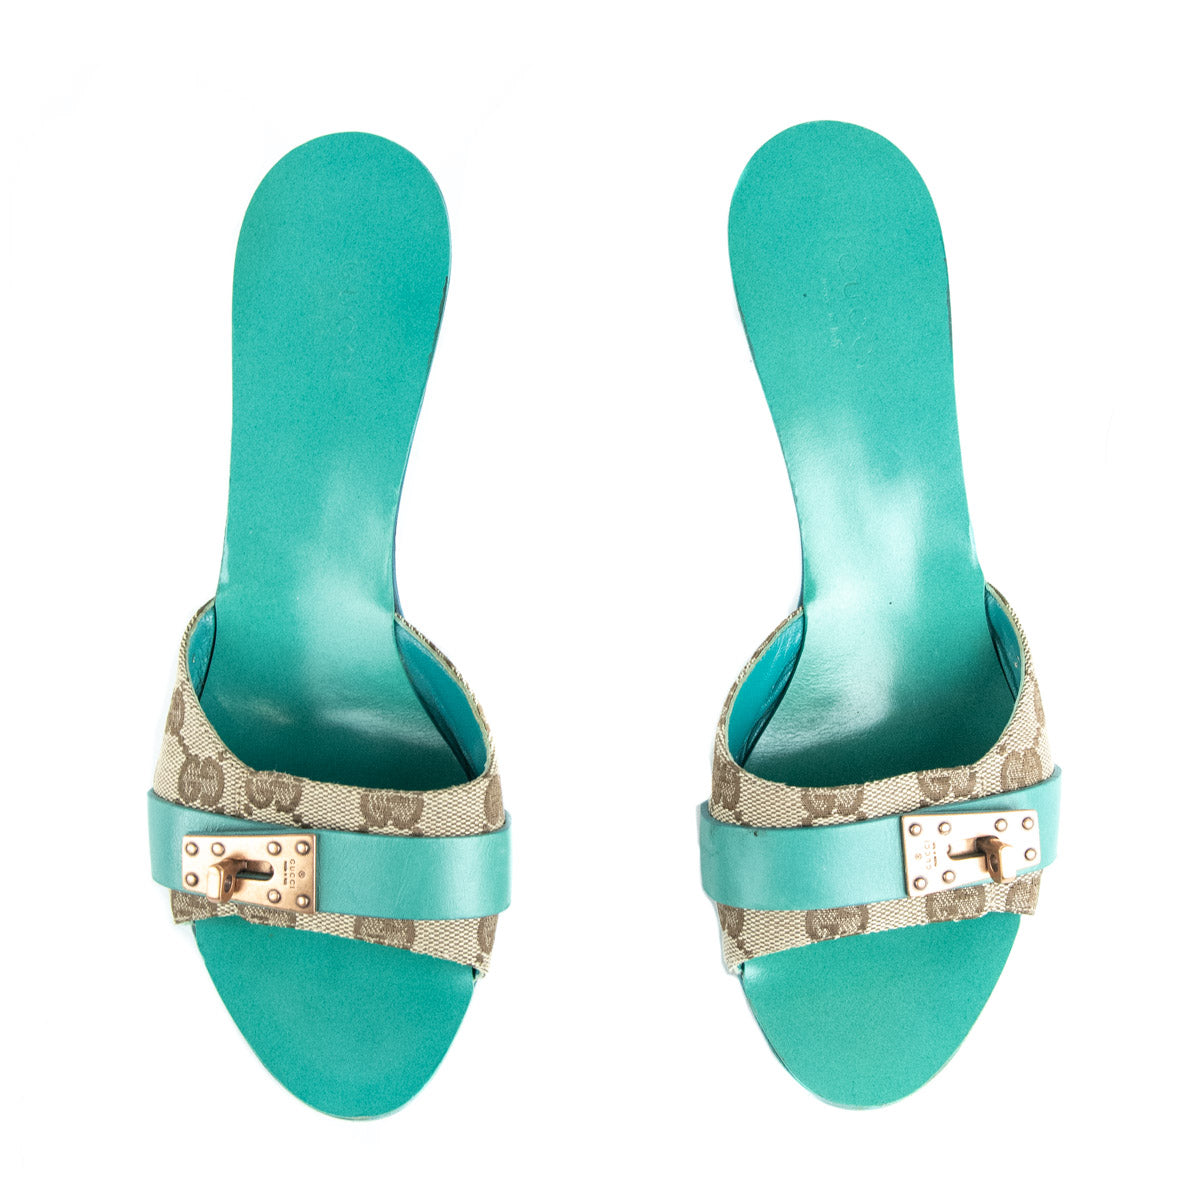 Gucci Turquoise & GG Canvas Slide Sandals Size US 7.5 | EU 37.5 - Love that Bag etc - Preowned Authentic Designer Handbags & Preloved Fashions